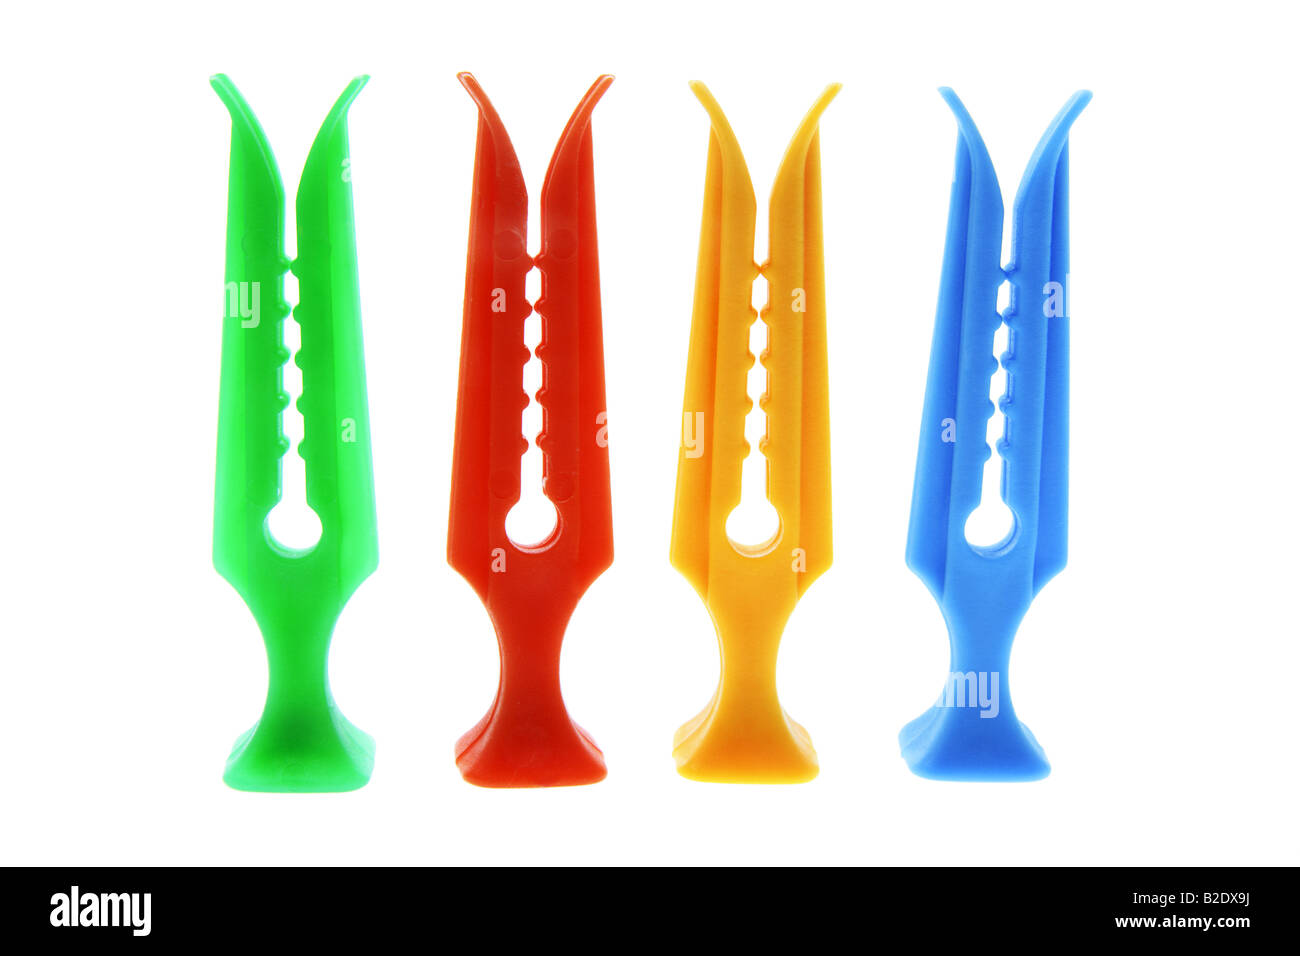 Row of Plastic Clothes Pegs Stock Photo